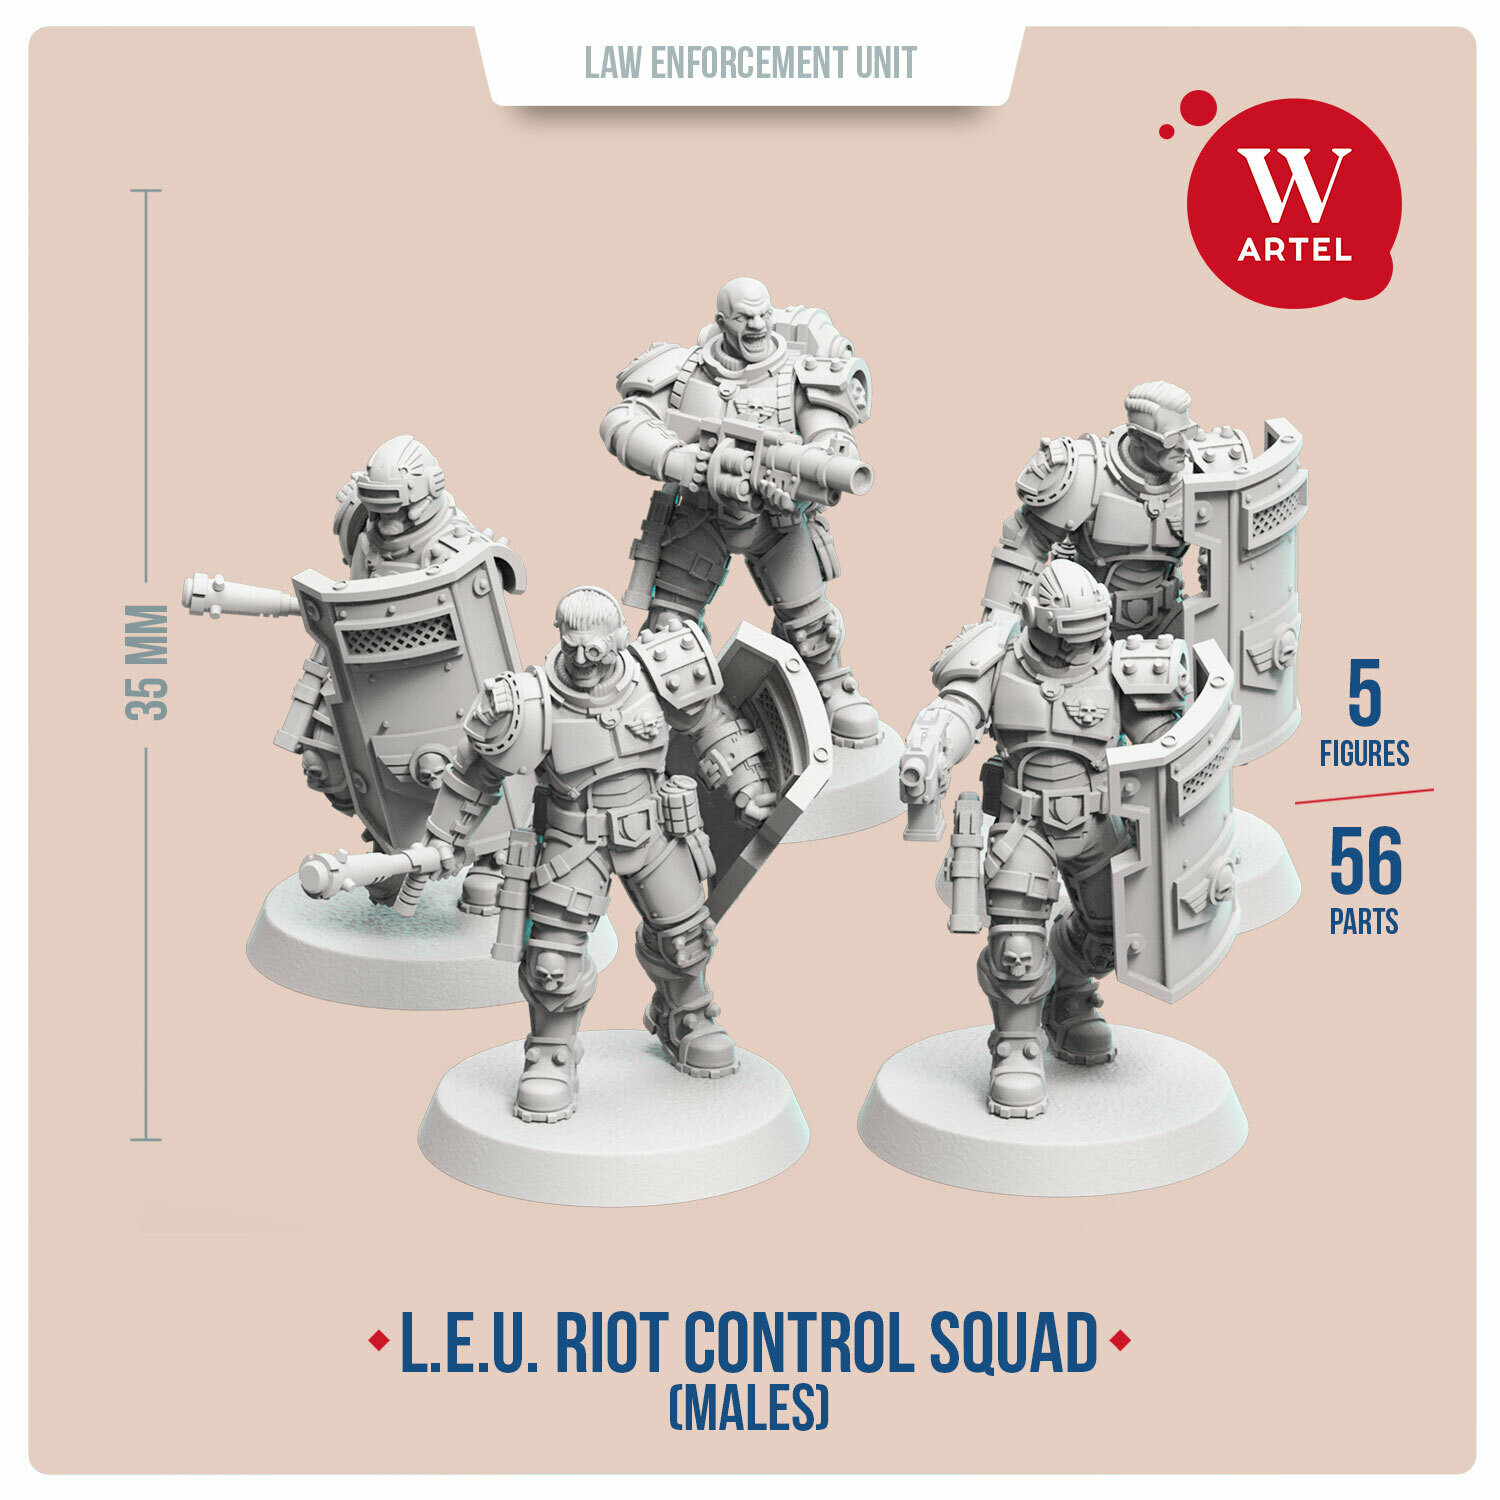 28mm wargame and collectible miniature Law Enforcement Unit by /"W/" Artel